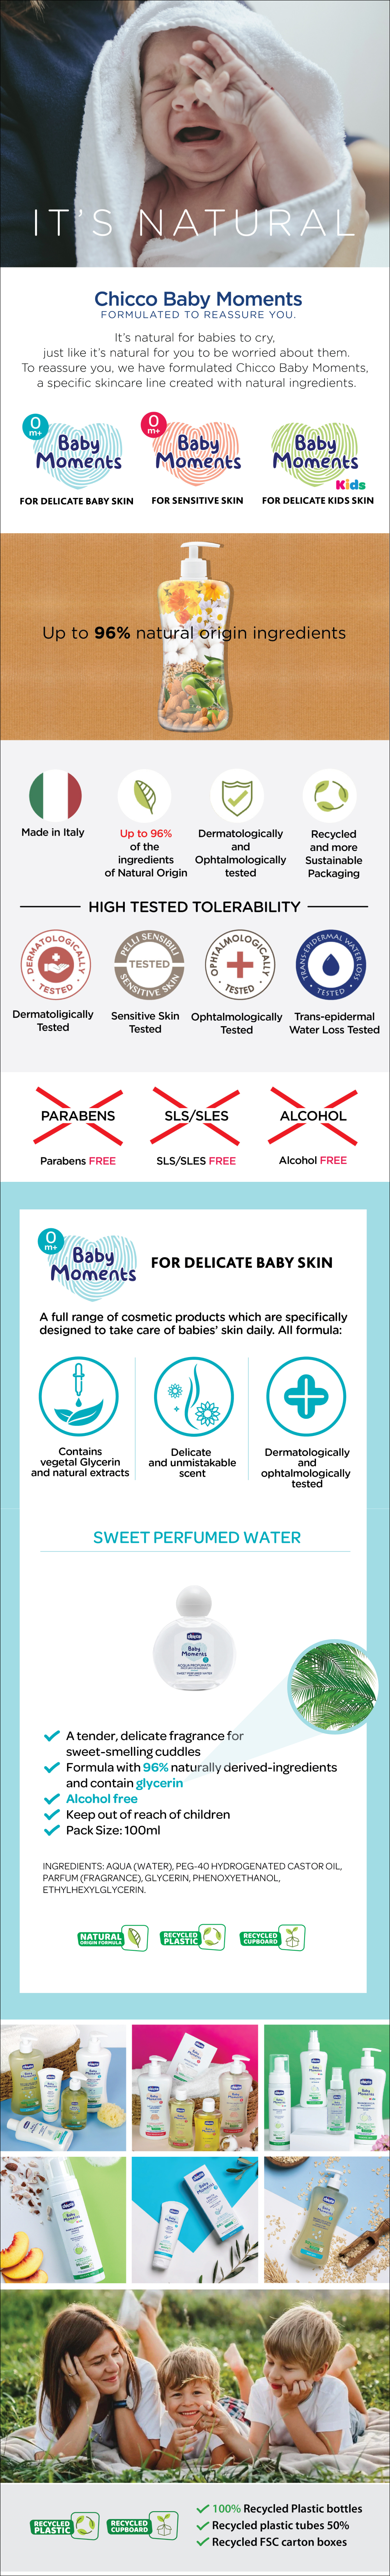 (Baby Skin) Chicco Baby Moments Sweet Perfumed Water